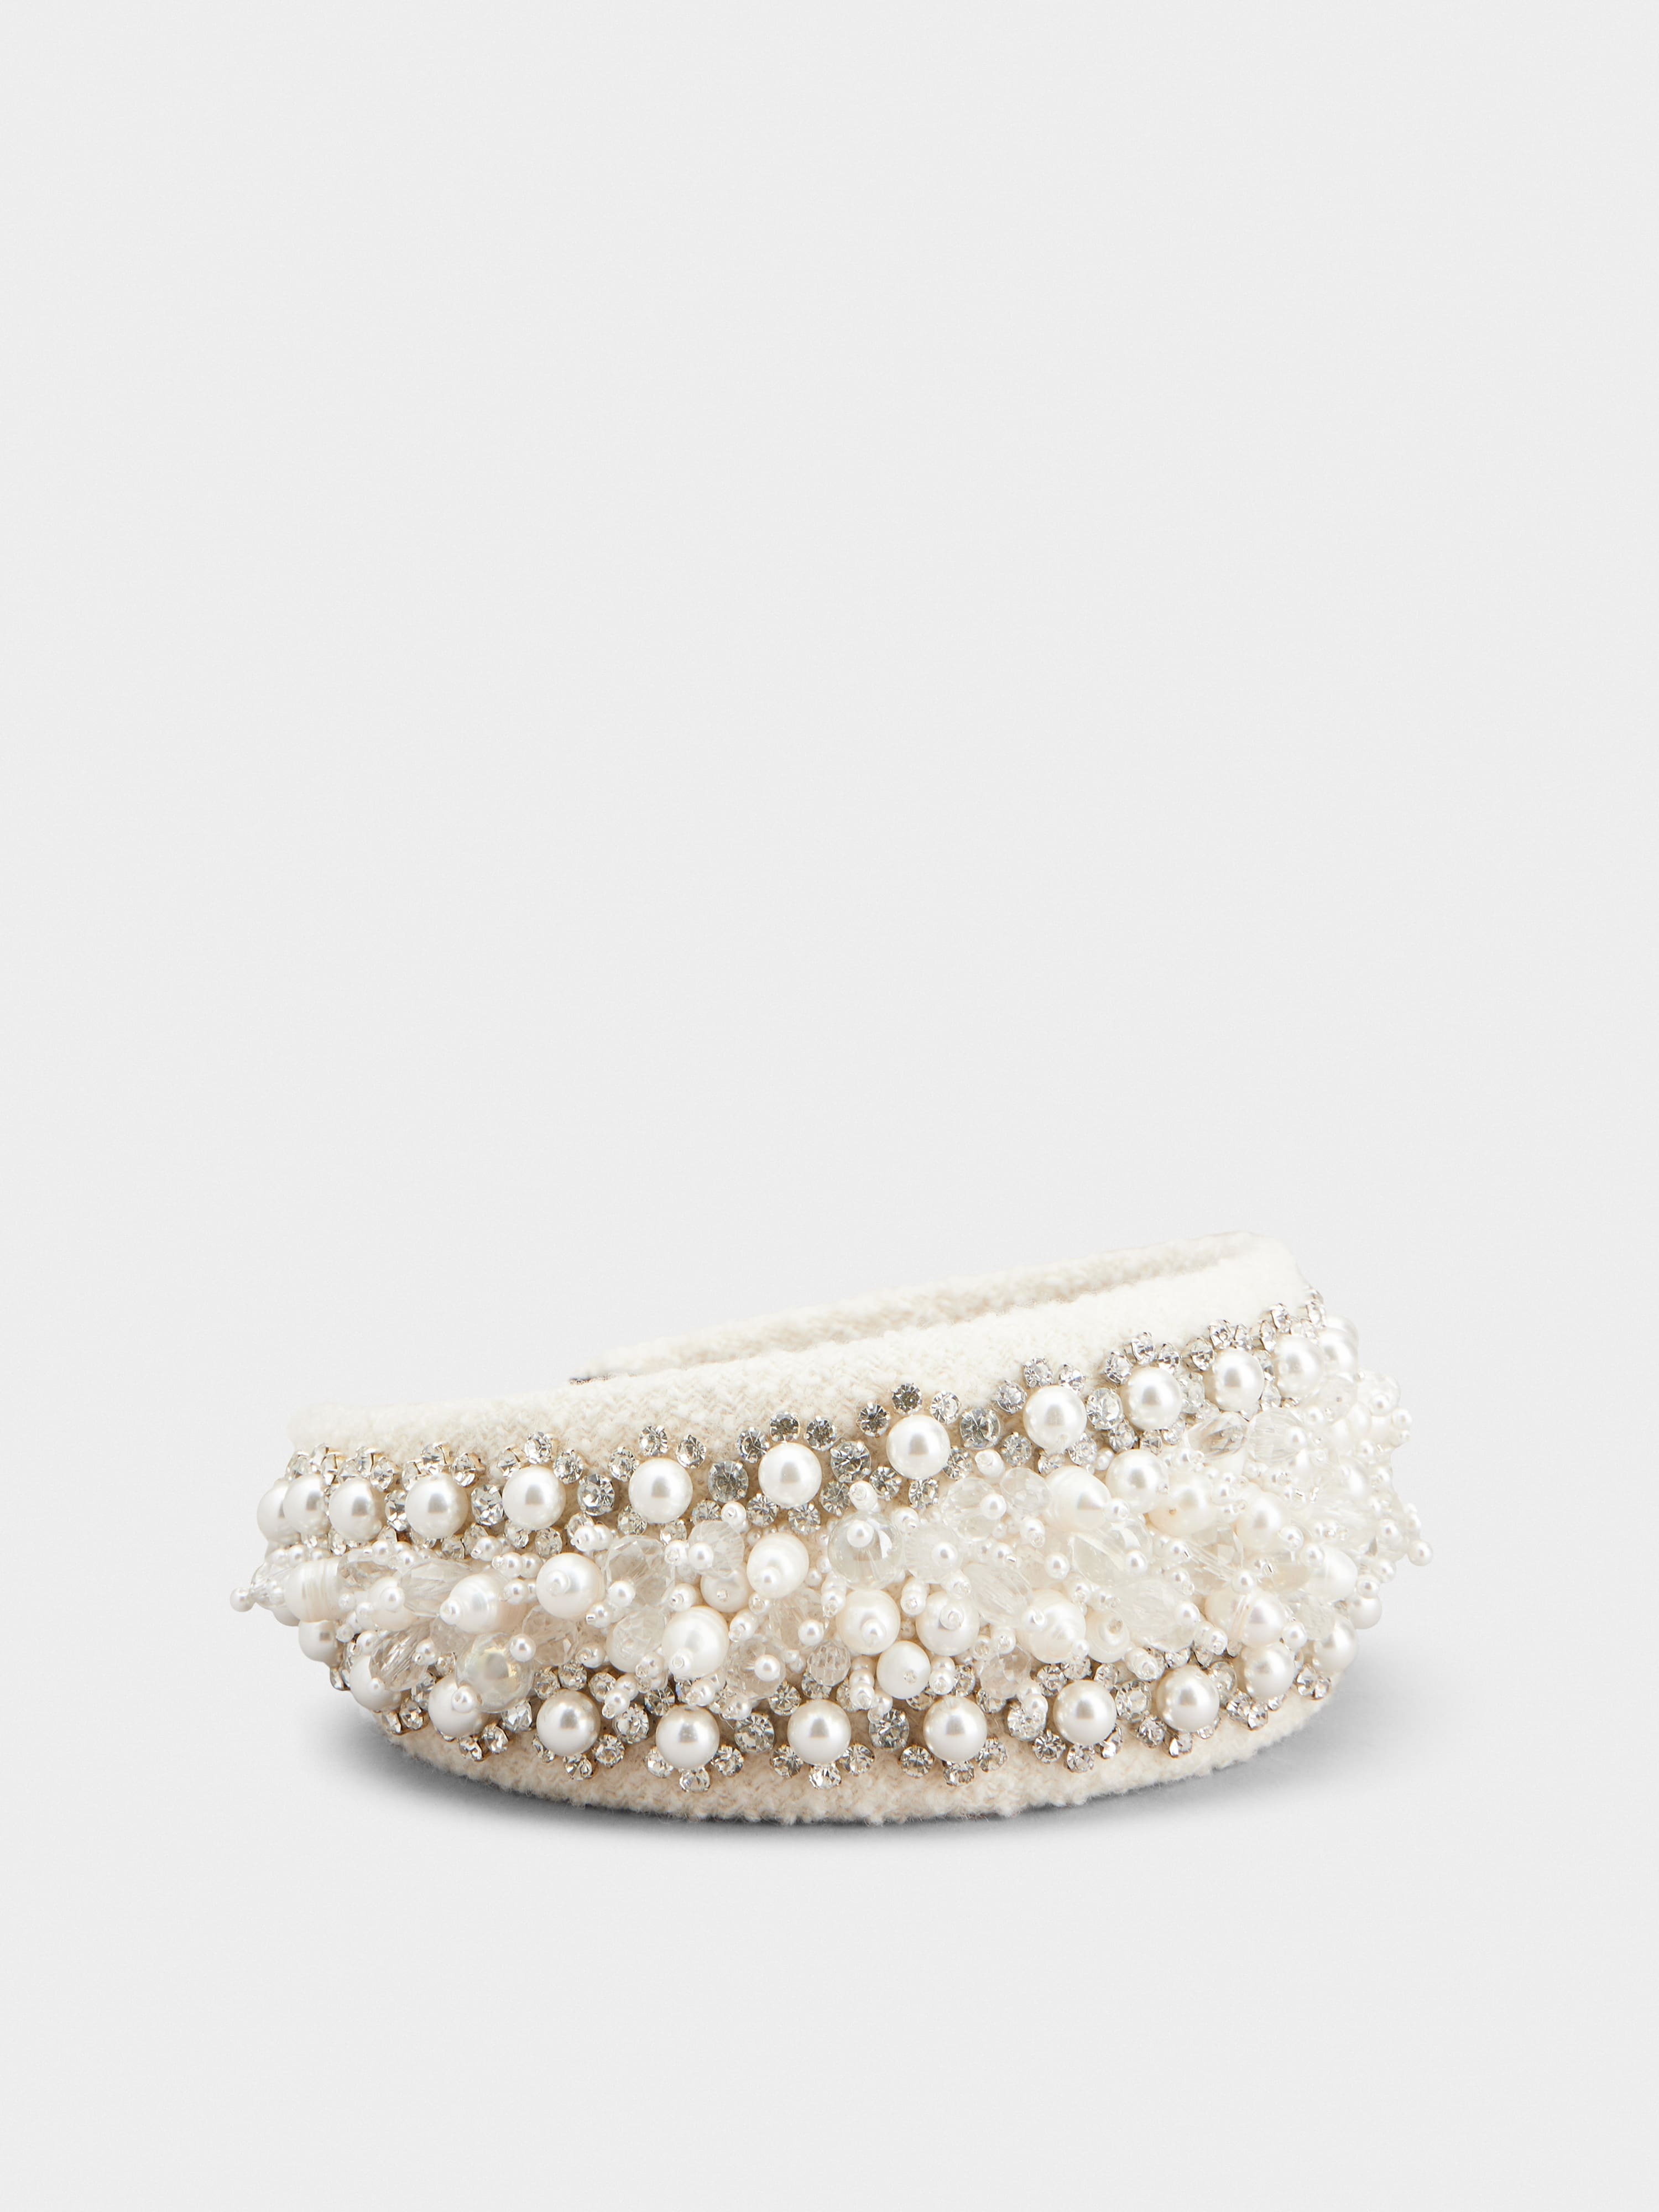 RV Pearl Embroidery Hairband in Wool - 4